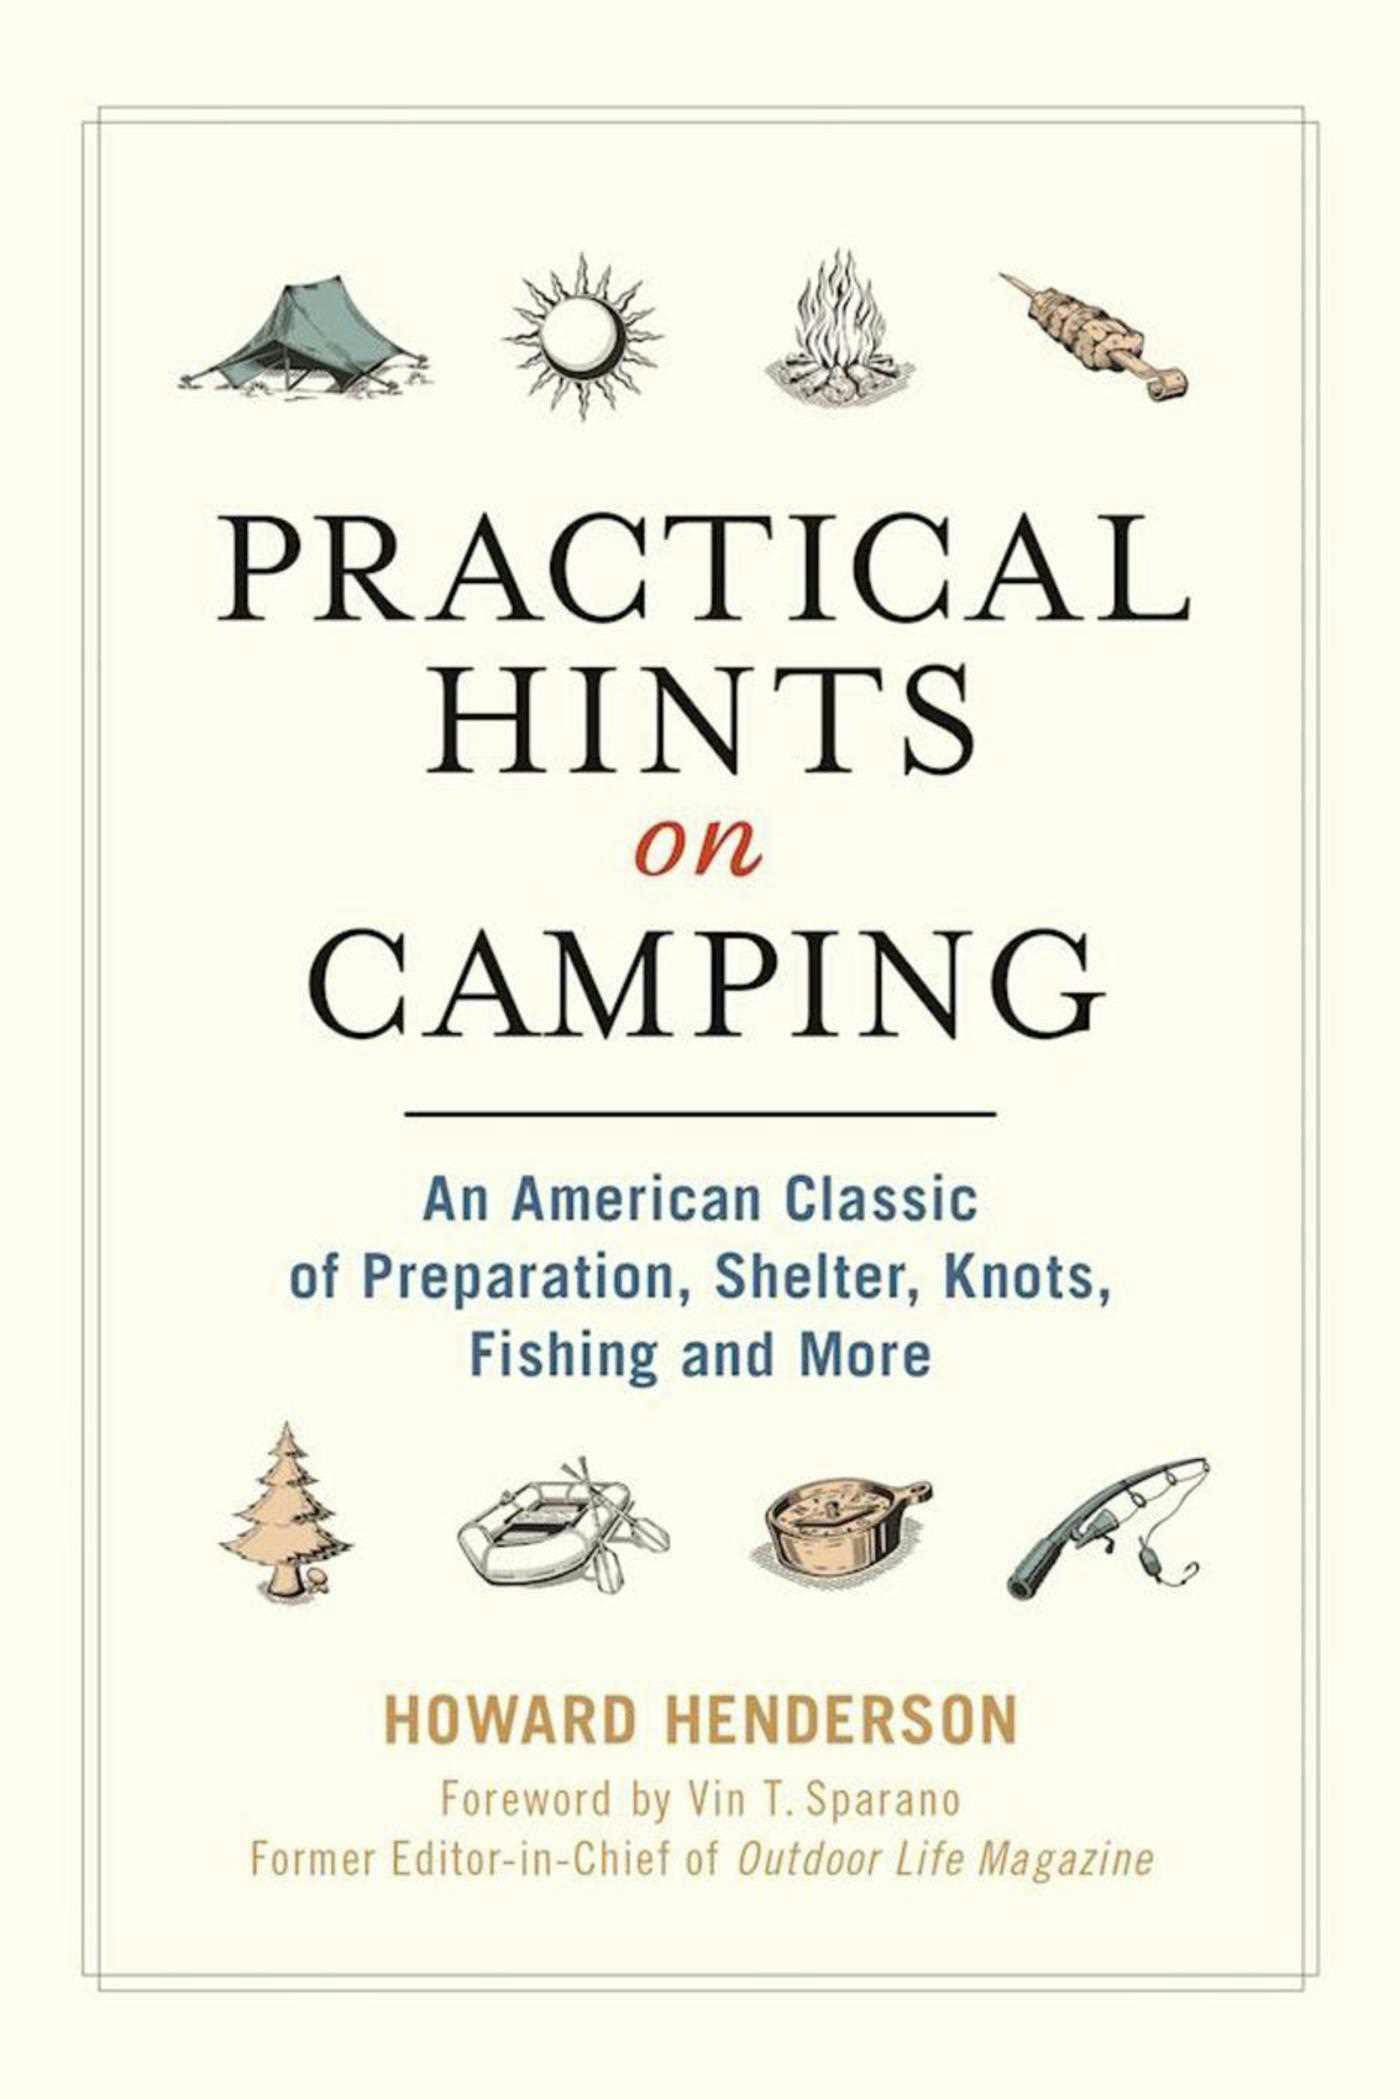 Practical Hints on Camping: An American Classic of Preparation, Shelter, Knots, Fishing, and More - Howard Henderson